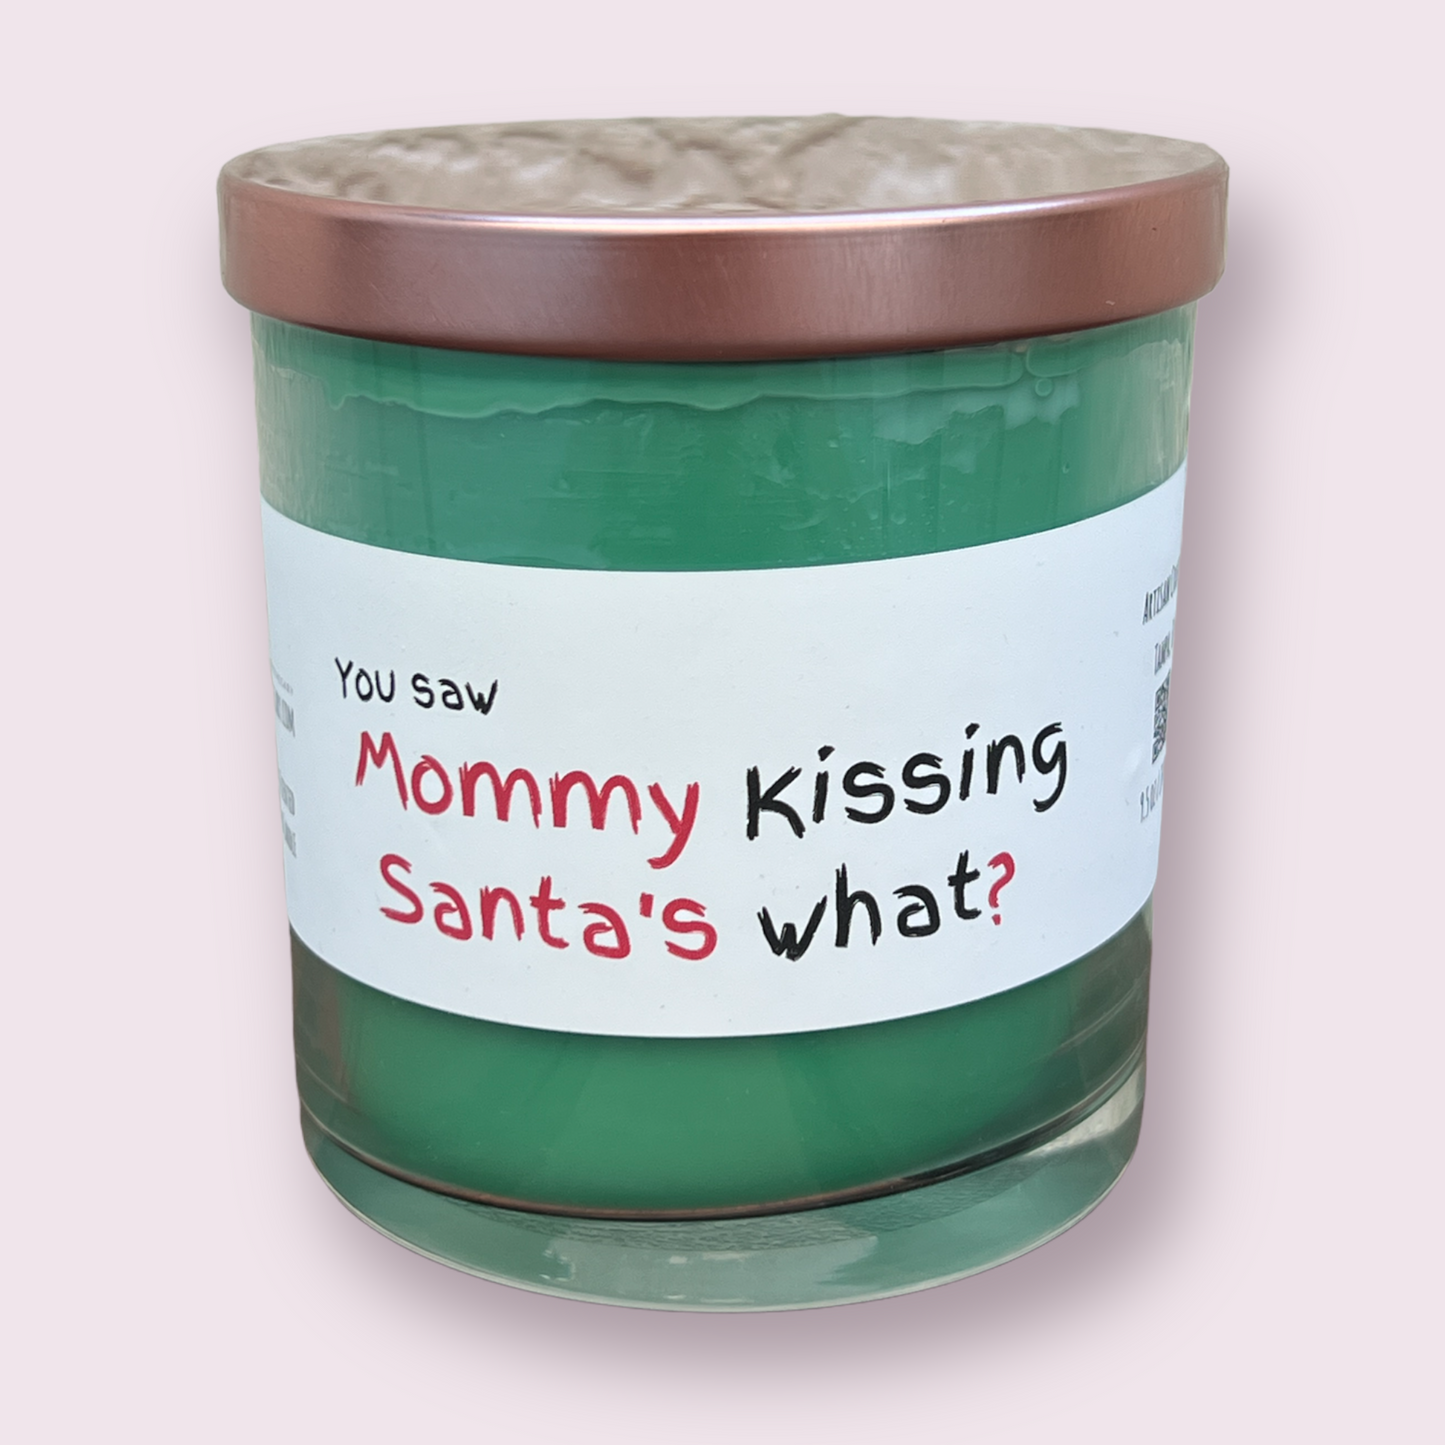 Mommy Kissing Santa's What Candle - Mistletoe scented candle